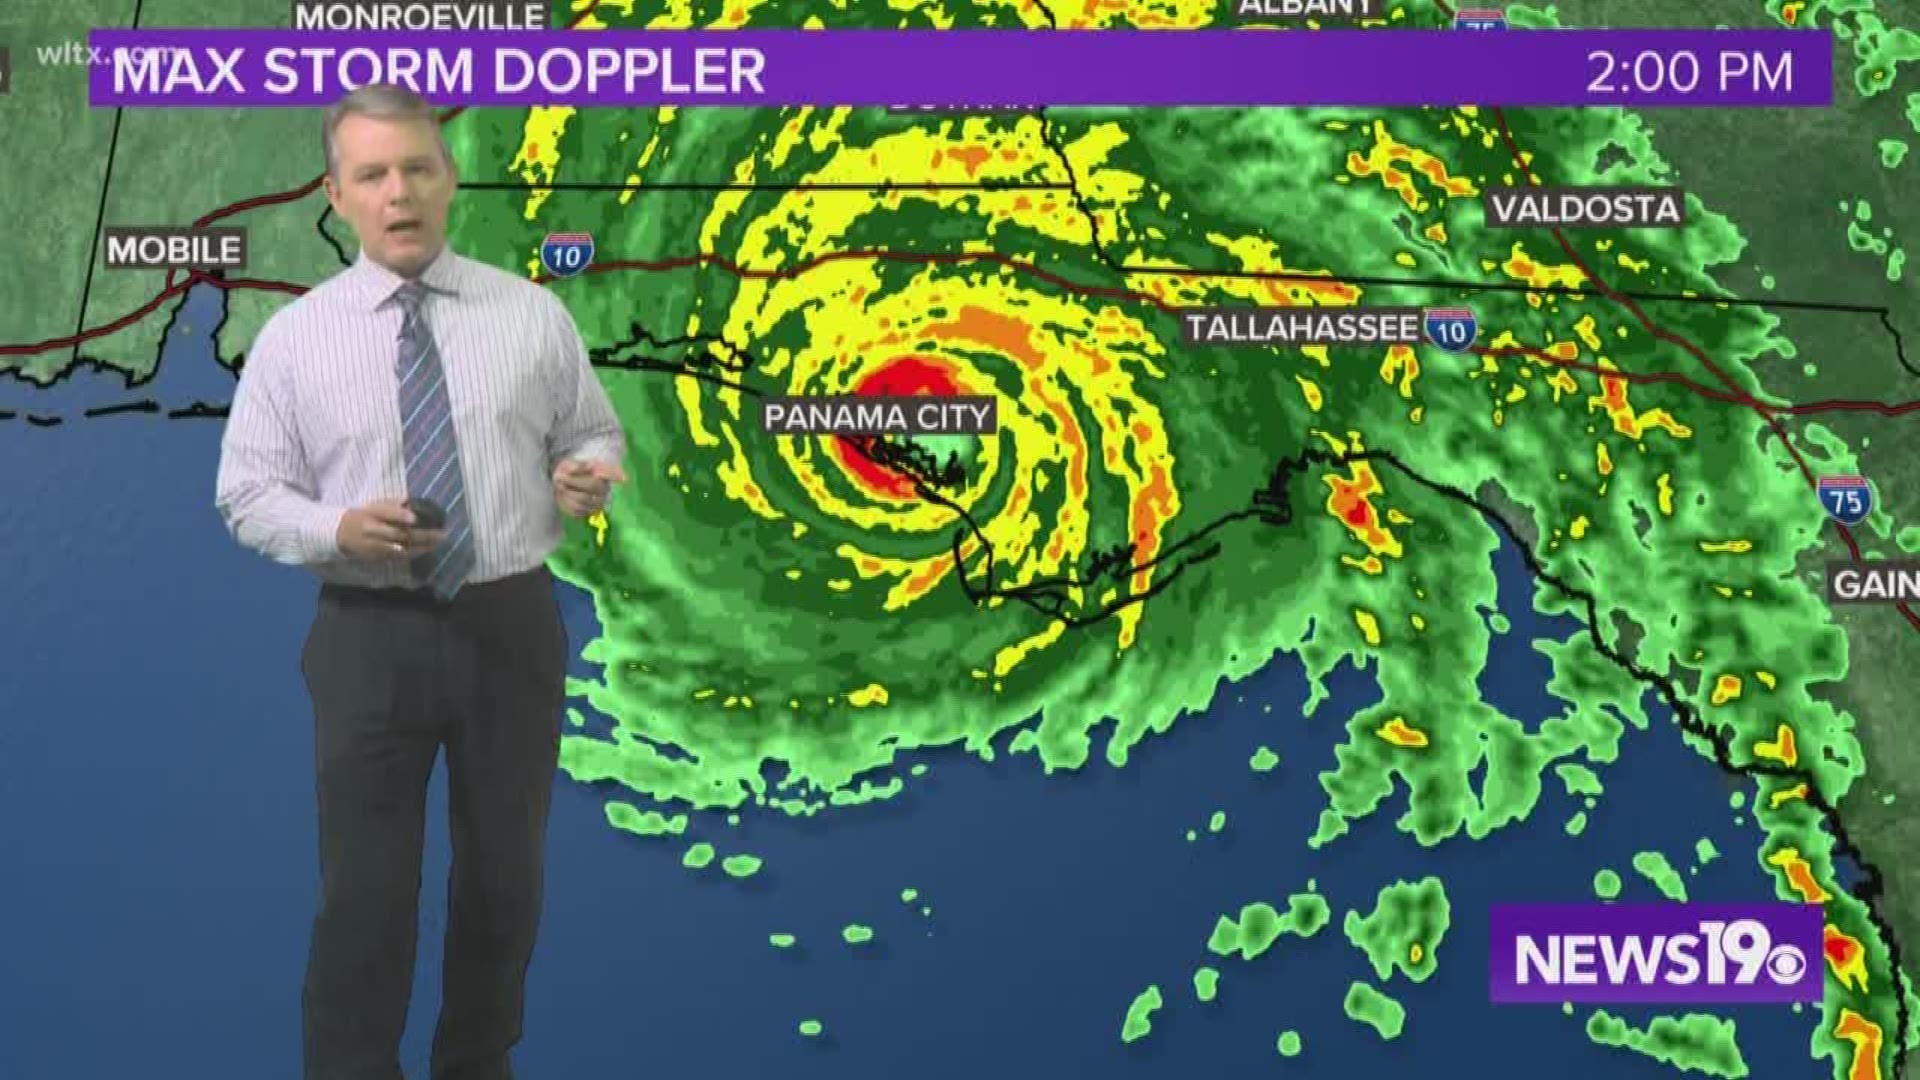 The latest on the powerful storm as it moves across Florida, Georgia, and South Carolina.